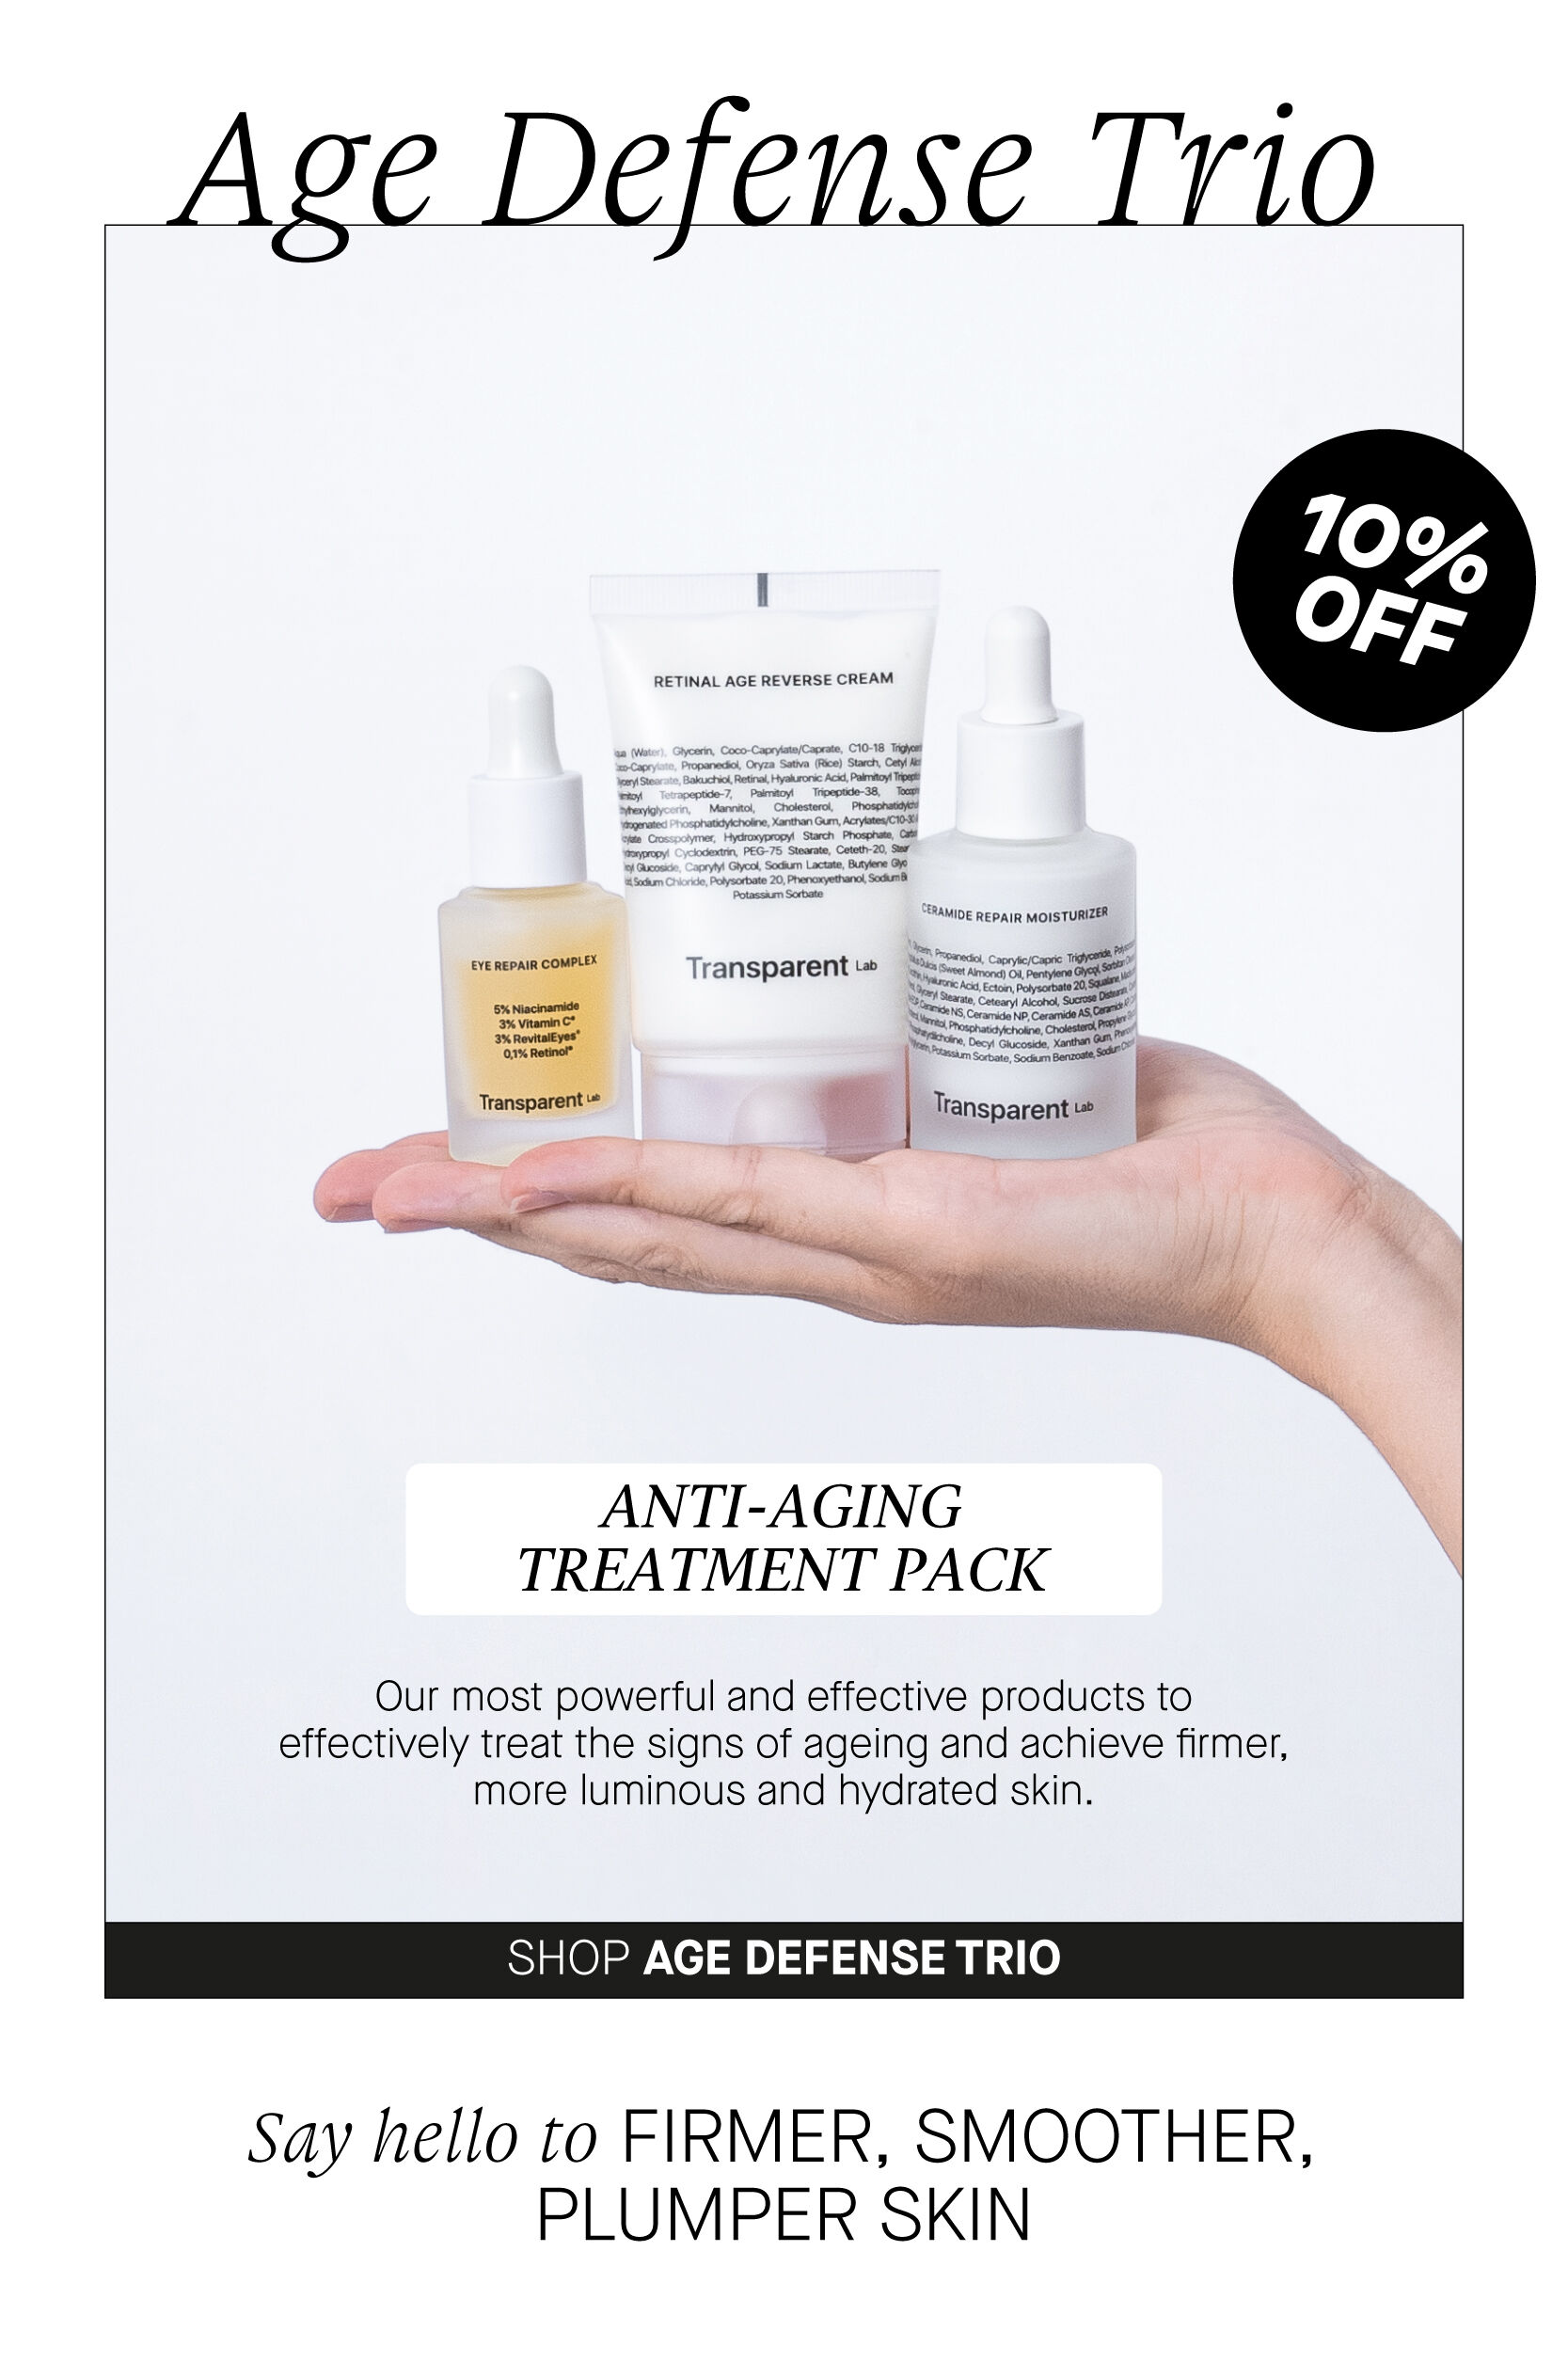  ANTI-AGING TREATMENT PACK Our most powerful and effective products to effectively treat the signs of ageing and achieve firmer, more luminous and hydrated skin. SHOP AGE DEFENSE TRIO Say hello to FIRMER, SMOOTHER, PLUMPER SKIN 